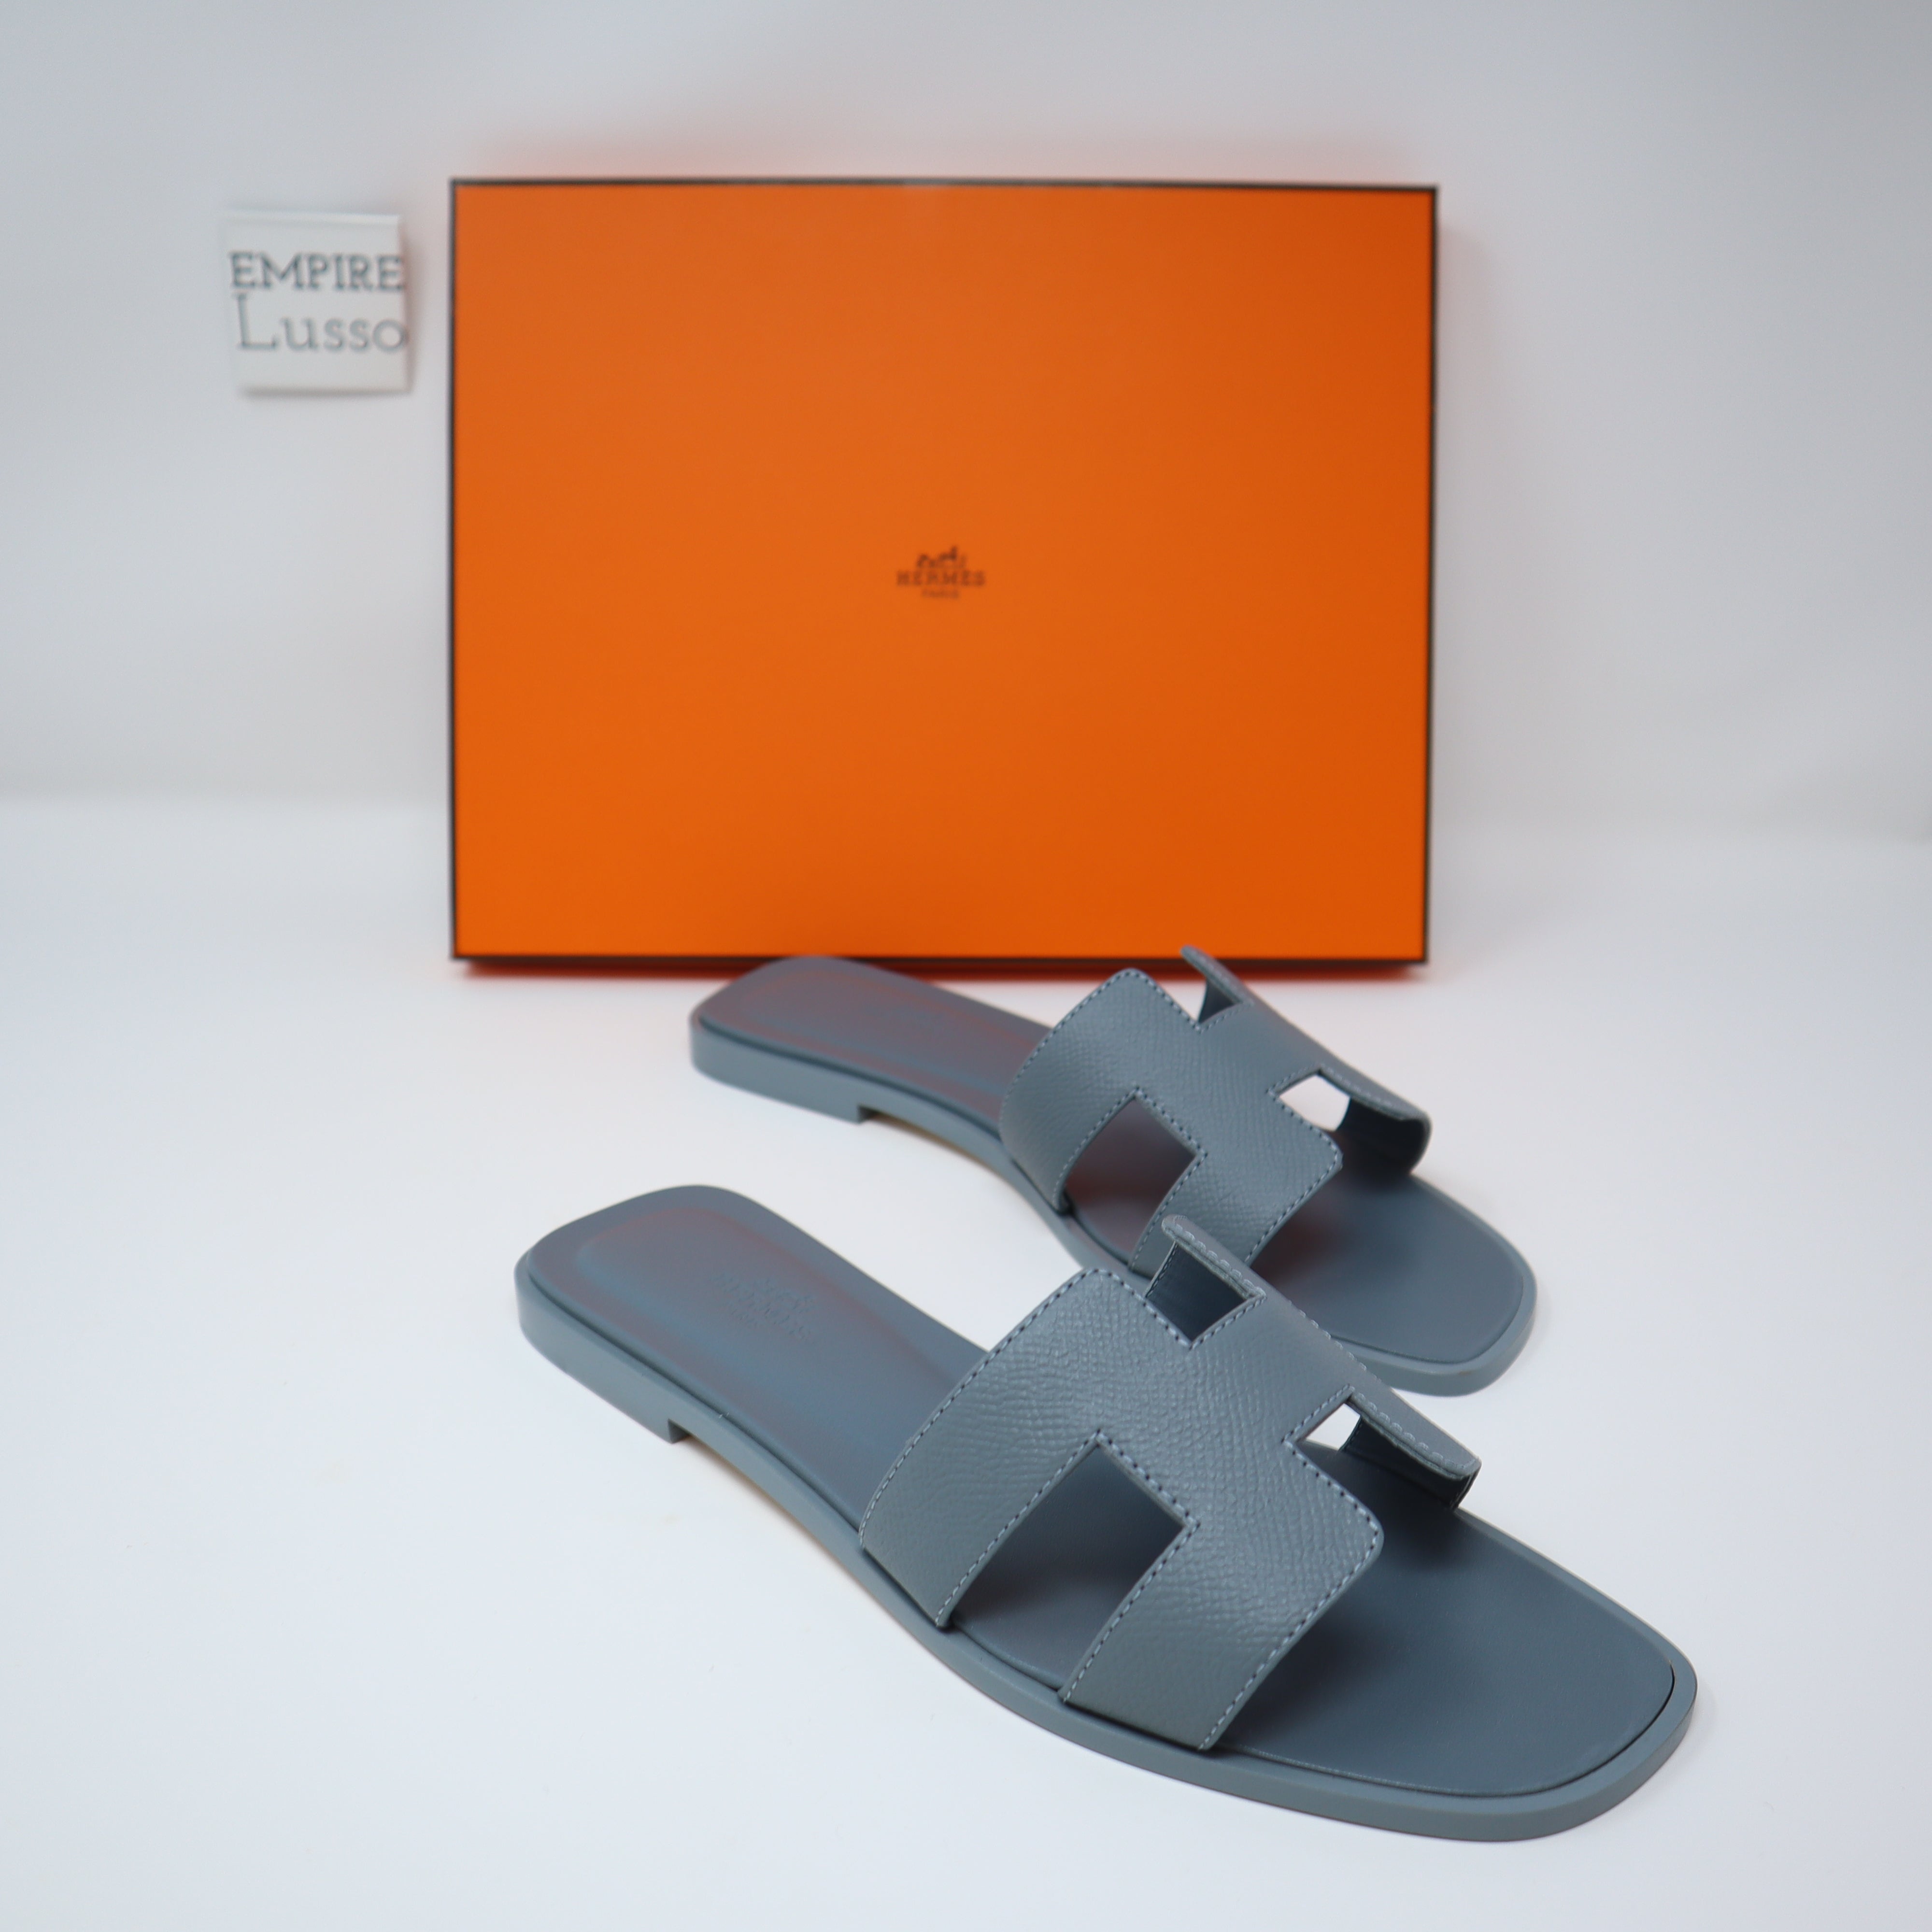 36 NEW HERMES ORAN H SANDALS SLIPPERS CLASSIC EPSOM ROUGE H RED DEEP D –  Empire Lusso